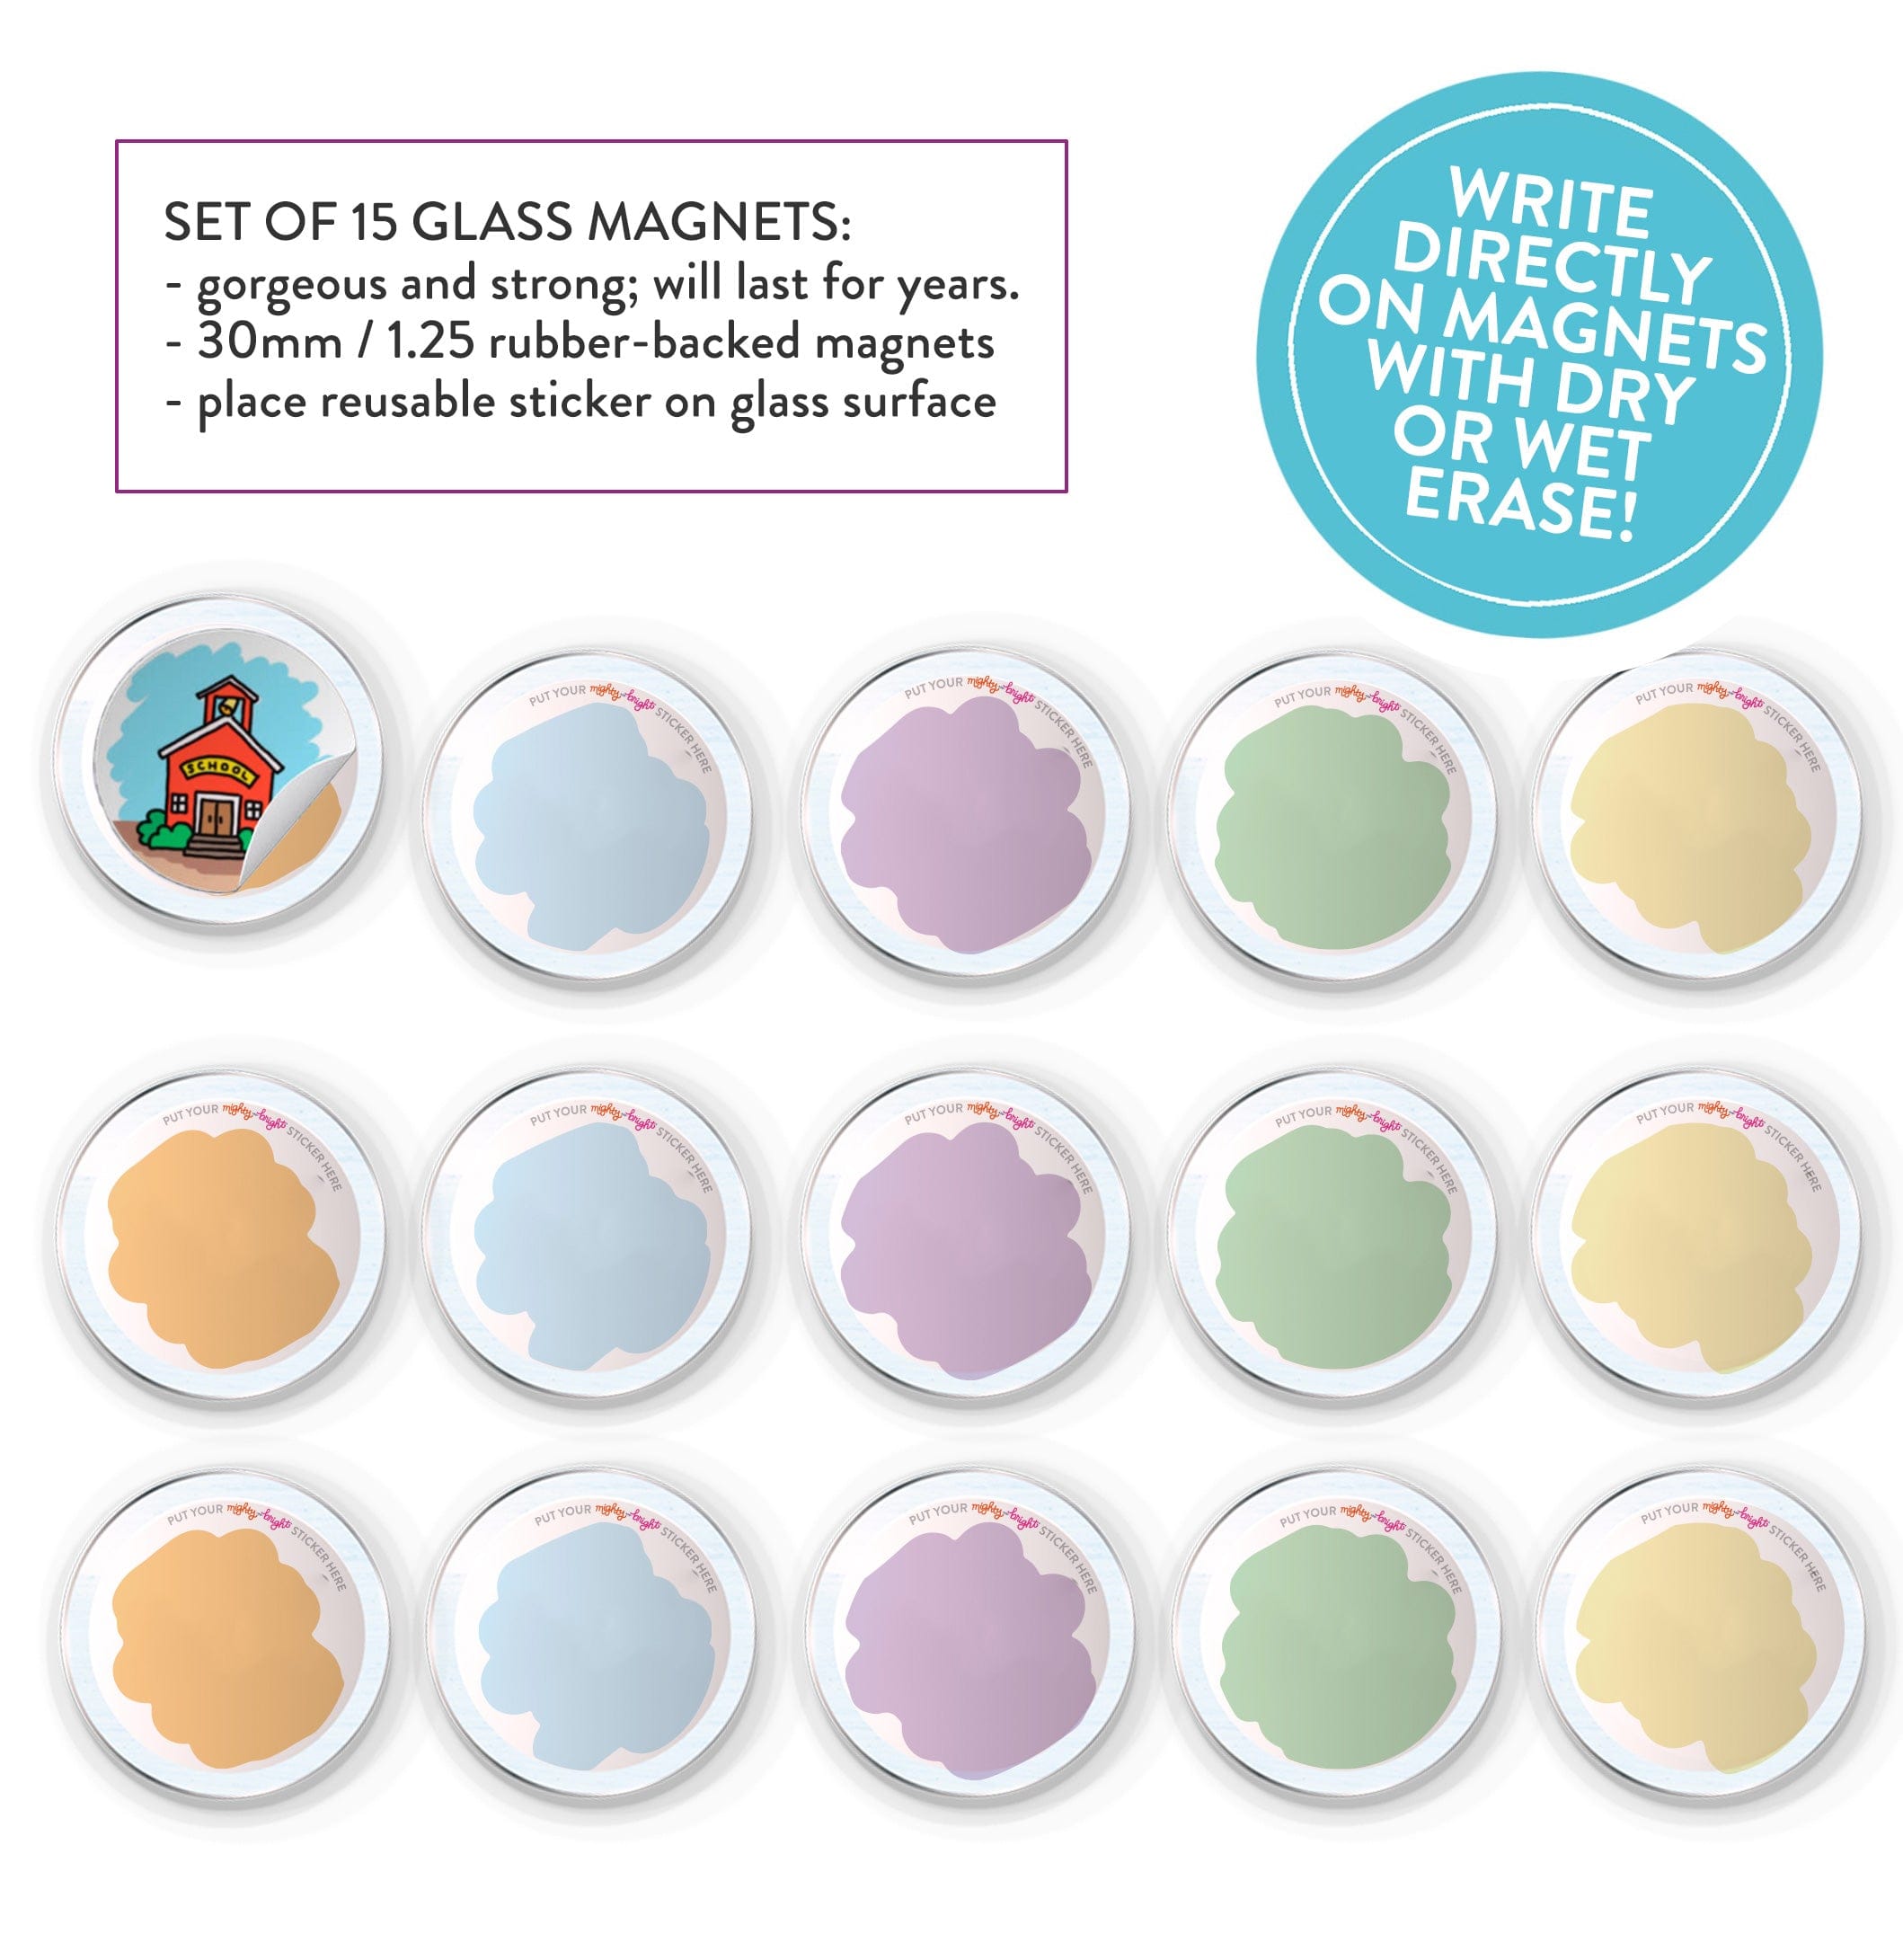 Set of 15 Glass Magnets – Mighty + Bright